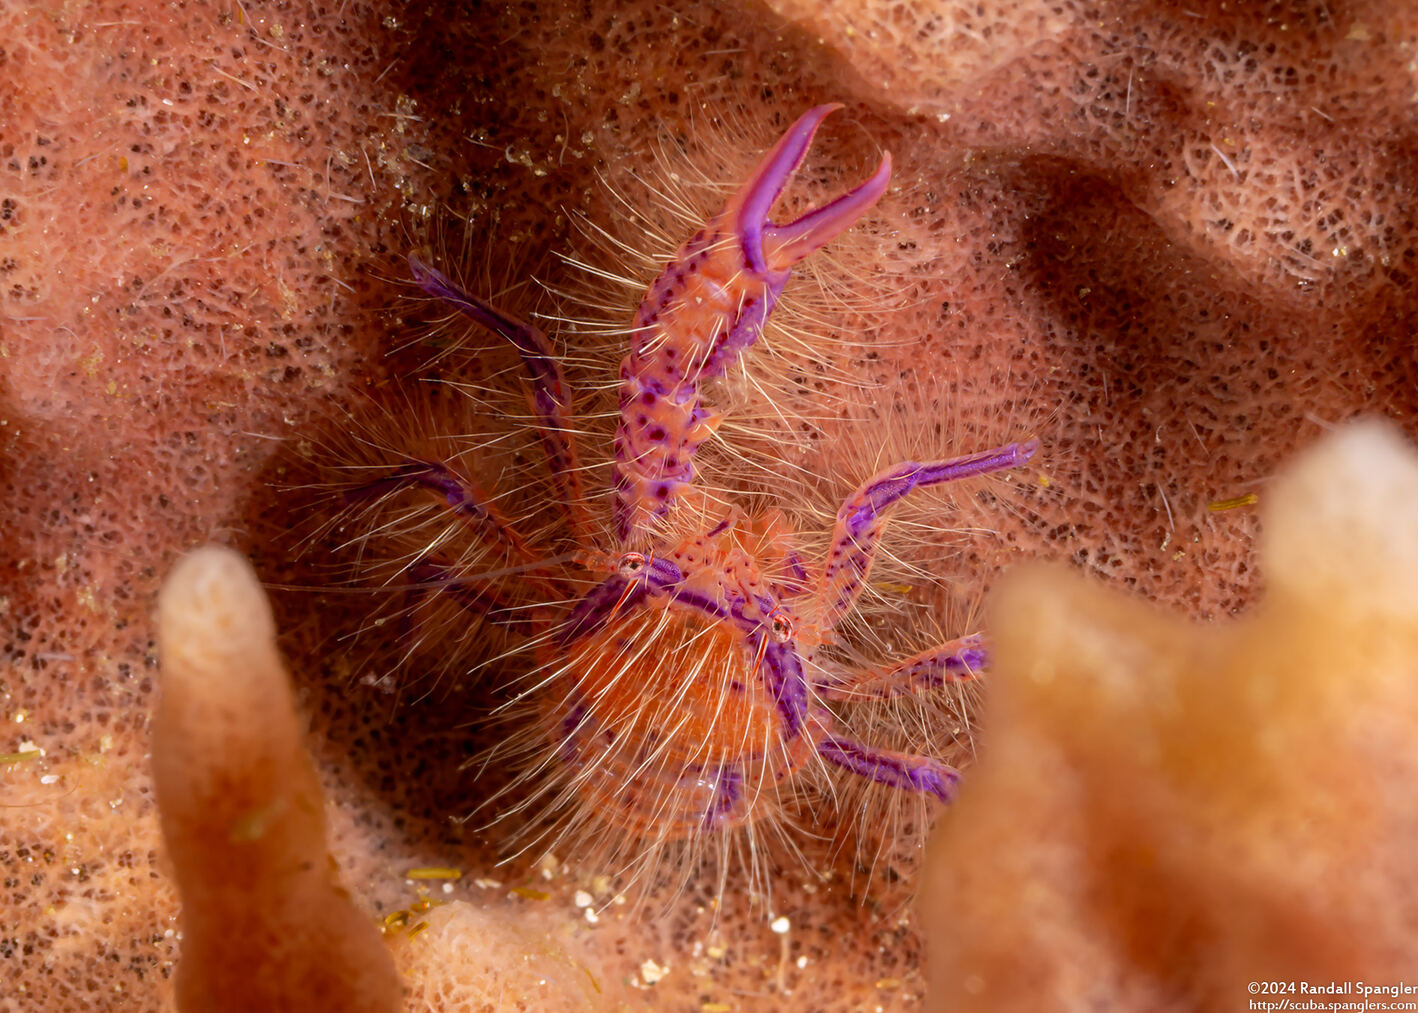 Lauriea siagiani (Hairy Squat Lobster)